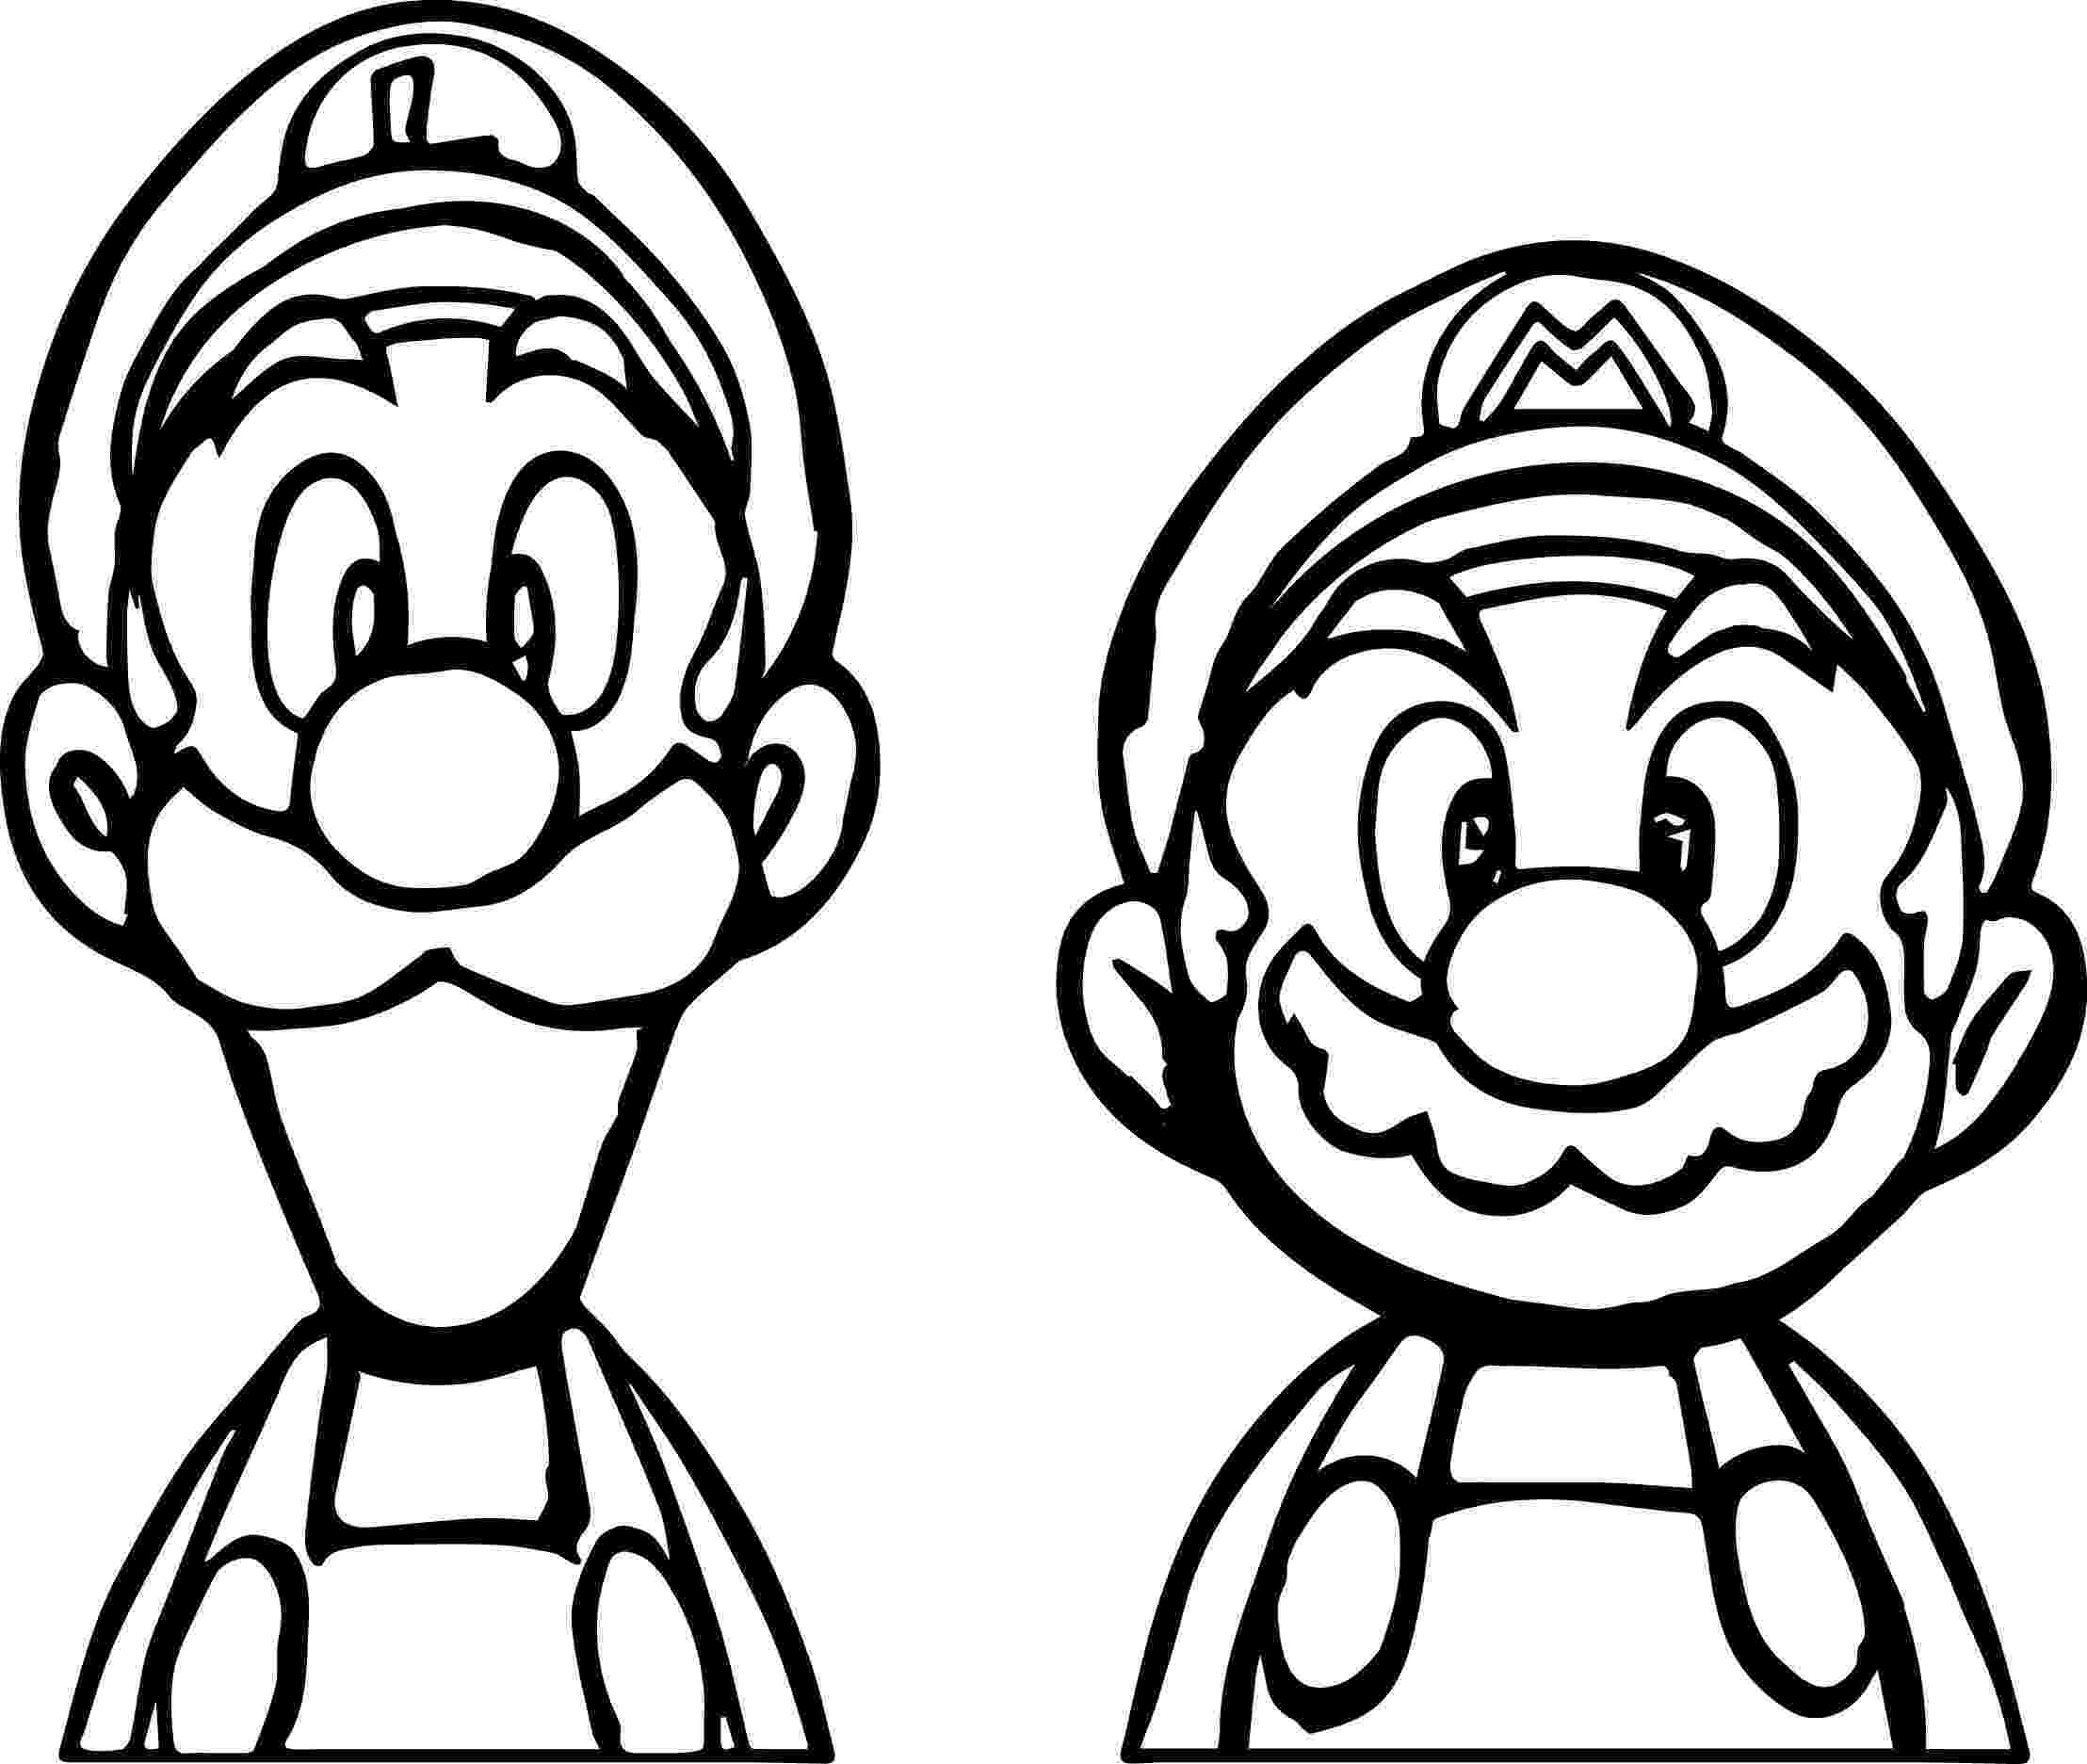 mario pictures pin by misty hufford on coloring super mario coloring mario pictures 